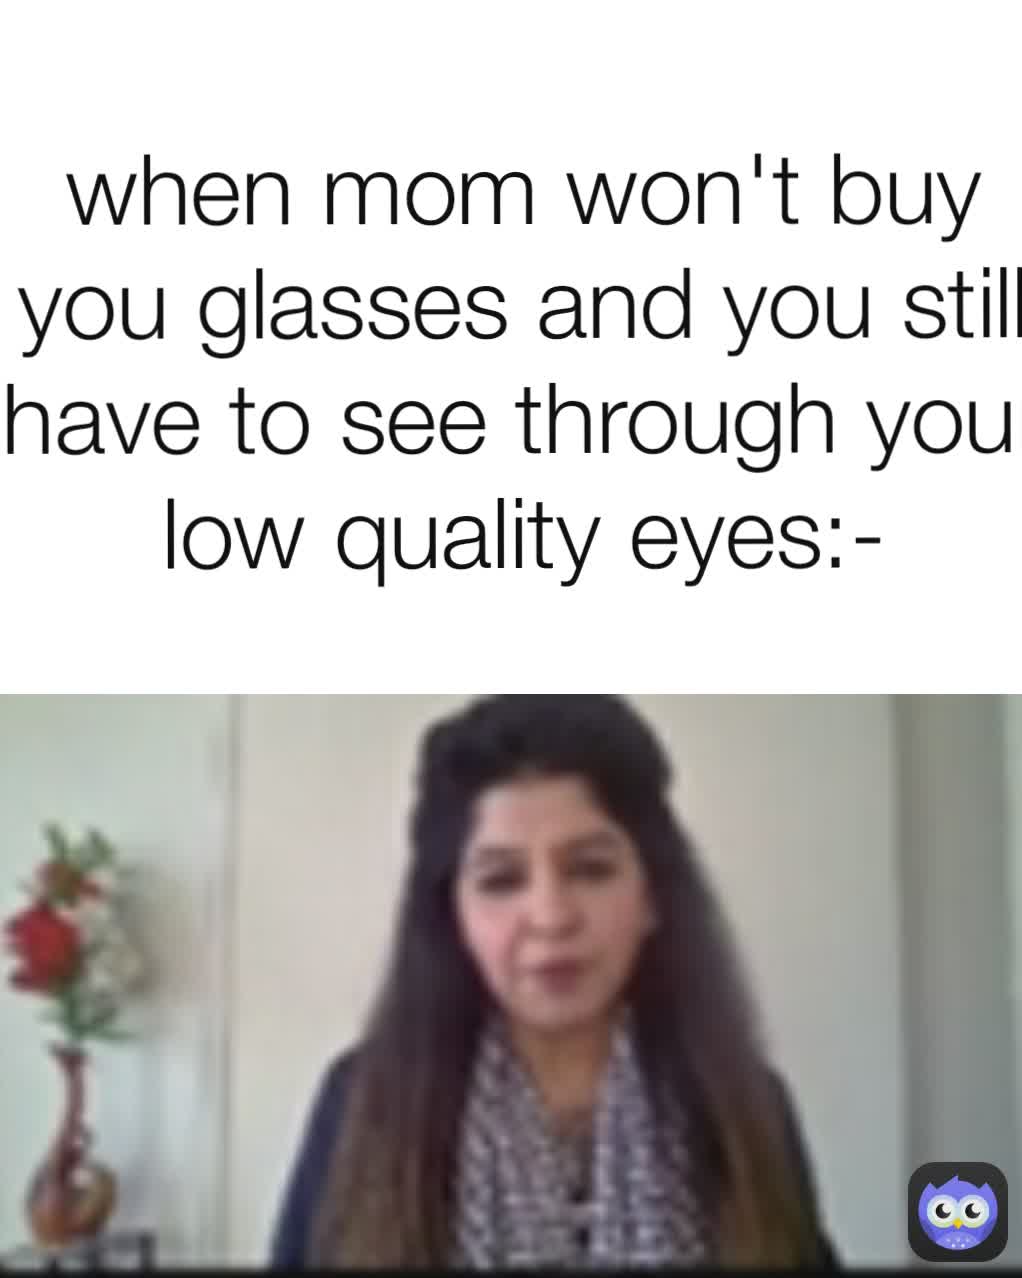 when mom won't buy you glasses and you still have to see through your low quality eyes:-